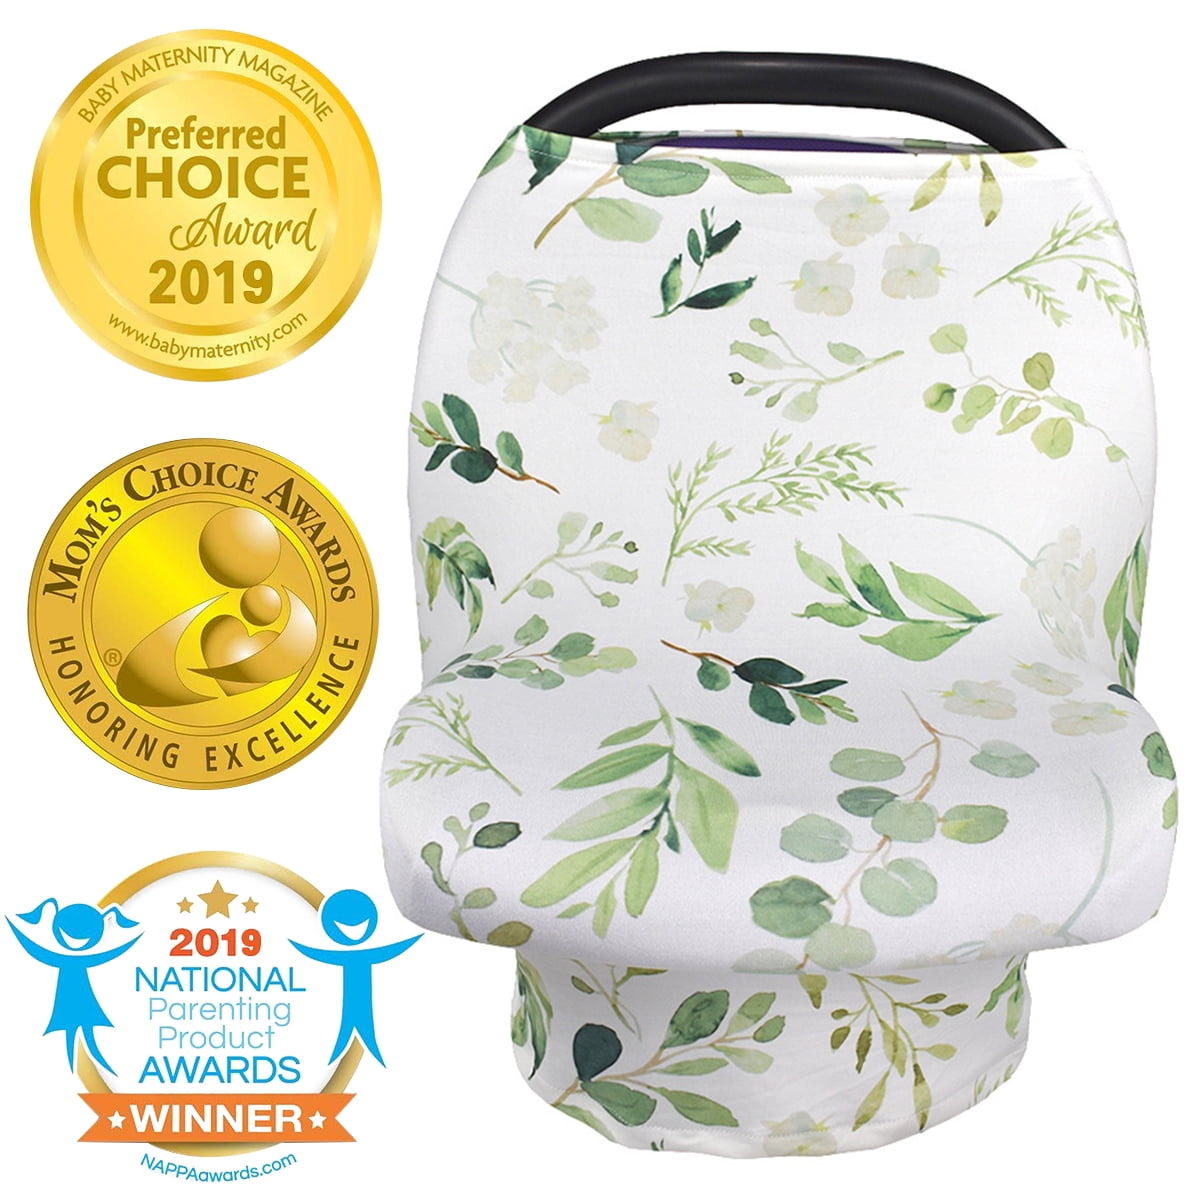 Stretchy Soft Breathable Multi-use Cover Ups Nursing Cover Breastfeeding Scarf/Shawl Cartoon Sloth Sleeping on The Tree Branches with Flowers Infant Carseat Canopy Baby Car Seat Covers Floral 